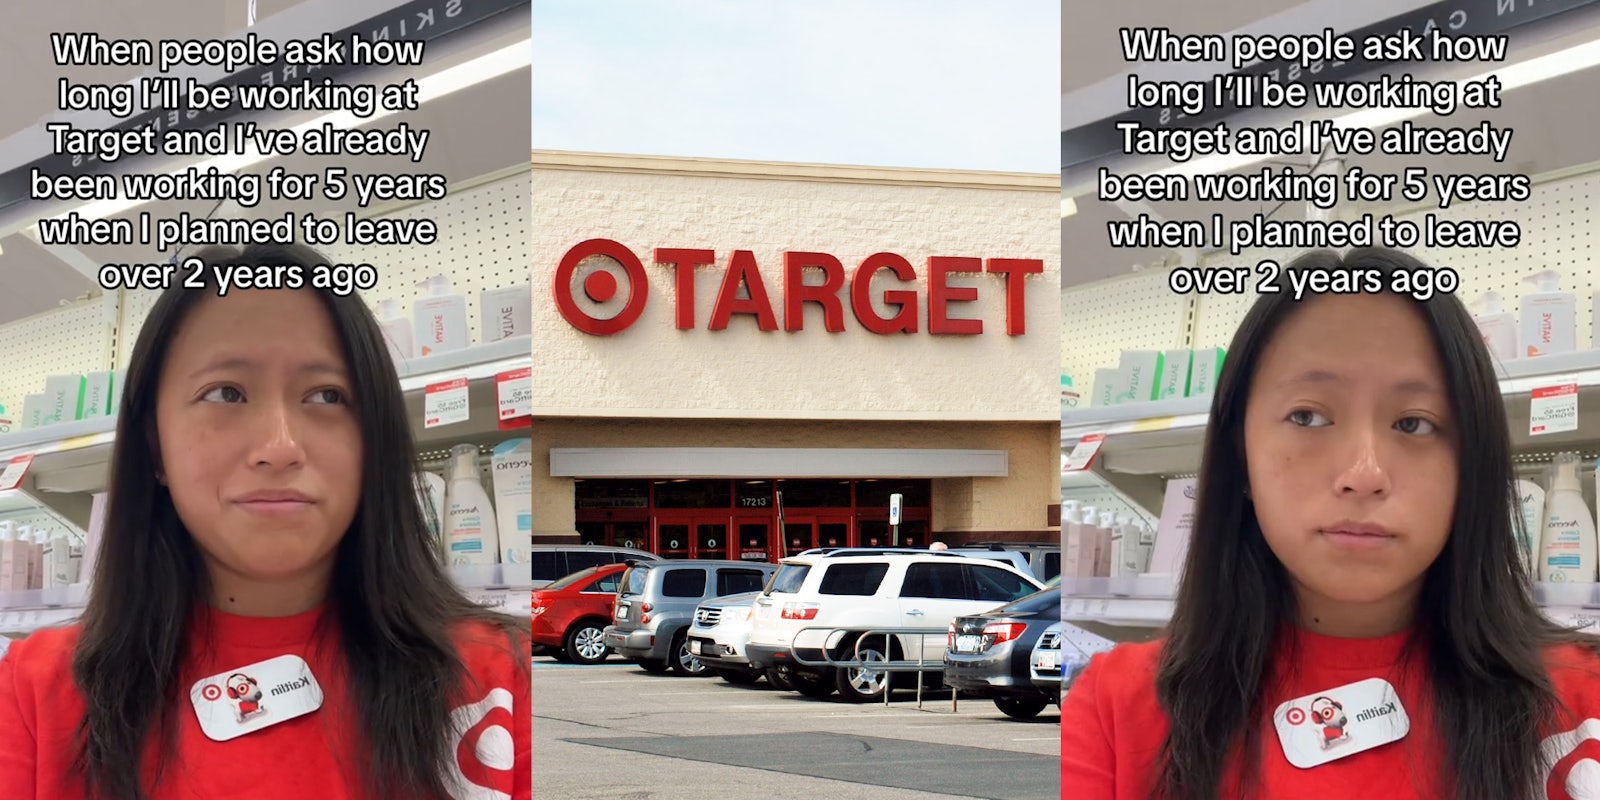 Target worker who's been there for 5 years says she planned to leave 2 years ago